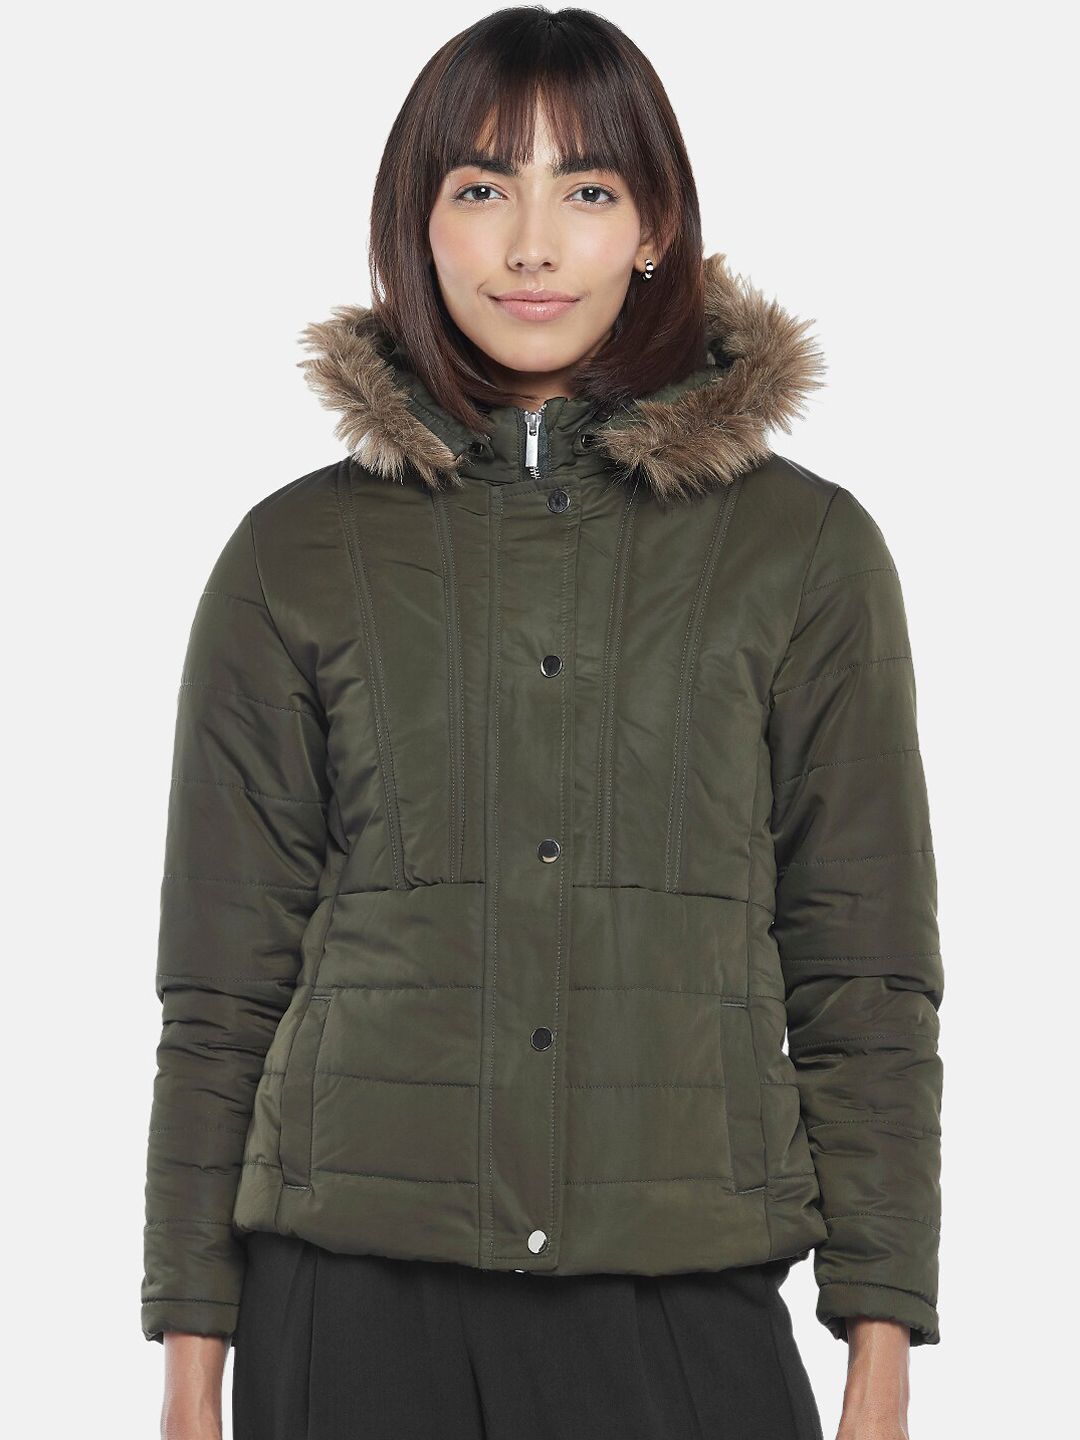 Honey by Pantaloons Women Olive Green Padded Jacket Price in India